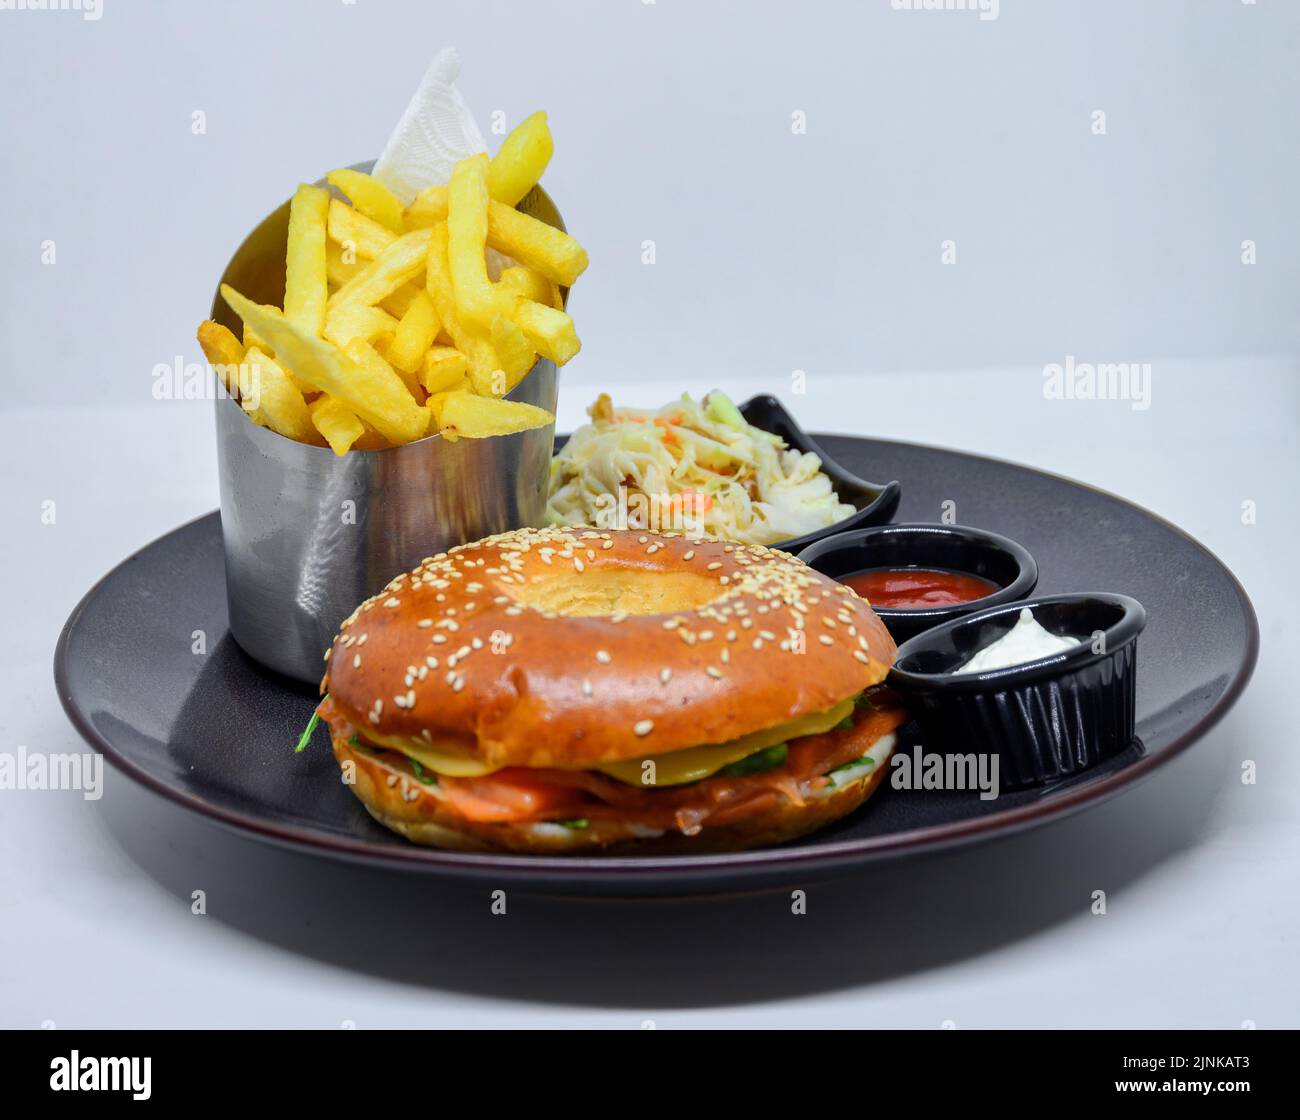 fast food menu. hamburger, french fries and salad. burger with beef stake, cheese and pickle. mayonnaise ketchup mustard on the  plate. Stock Photo